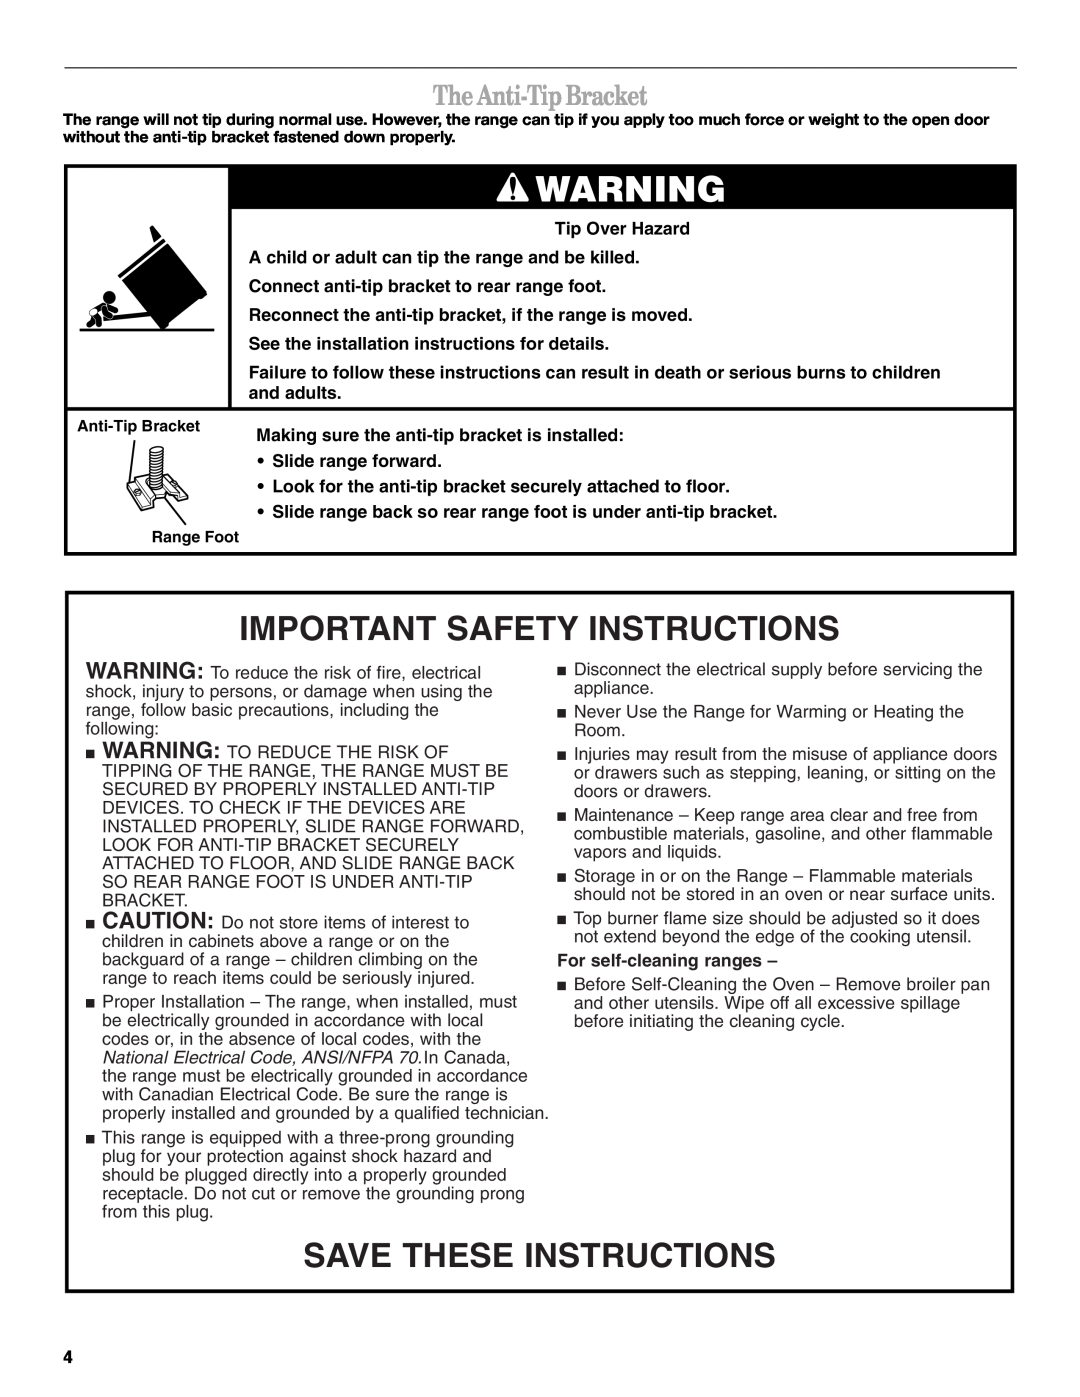 Whirlpool SF195LEK The Anti-Tip Bracket, Important Safety Instructions, Save These Instructions, For self-cleaning ranges 